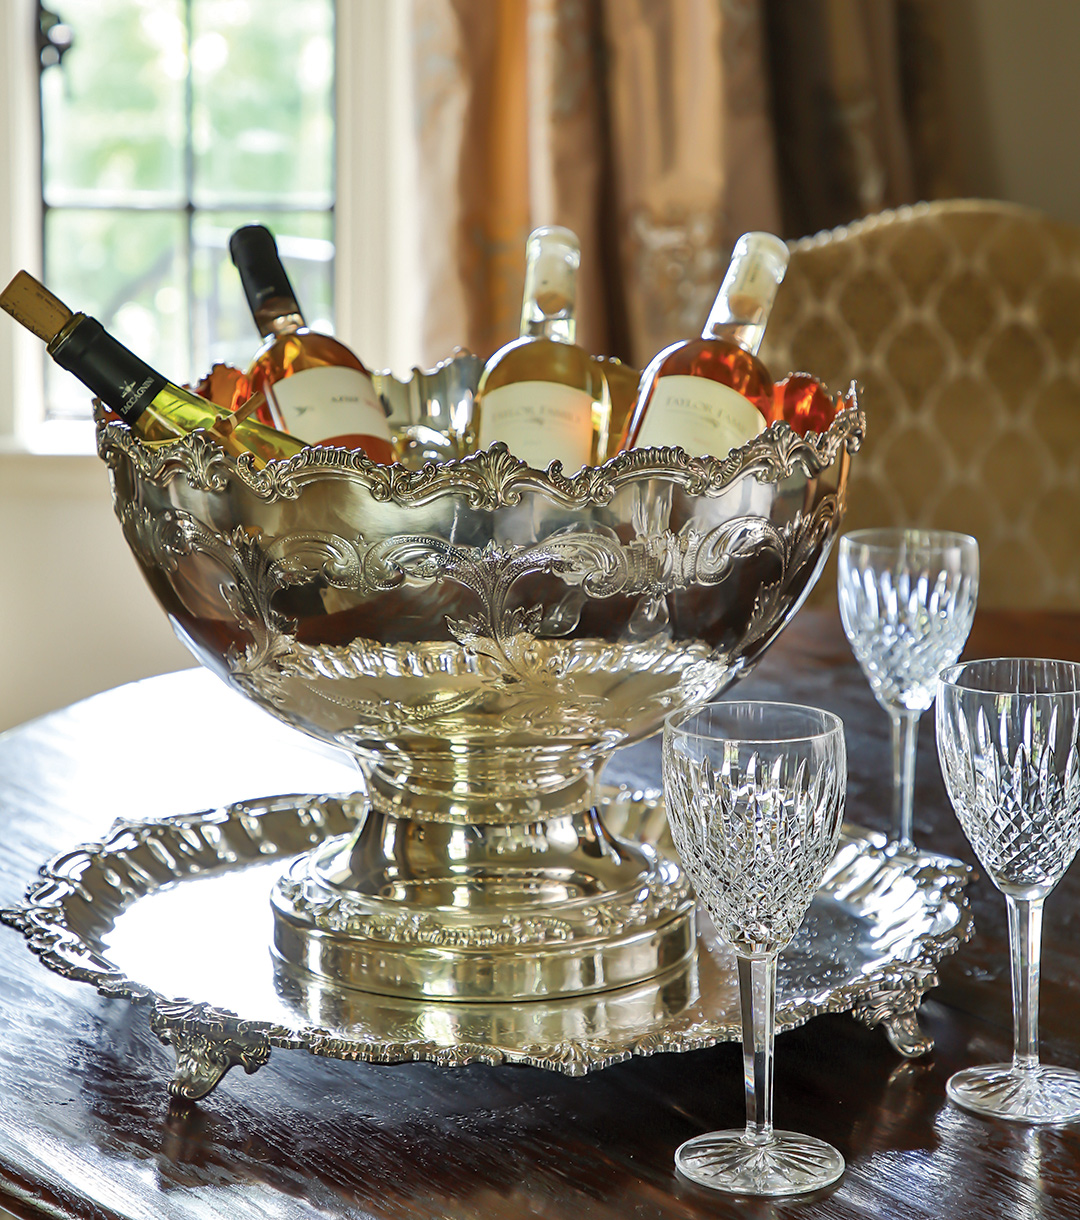 silver punch bowl filled with wine